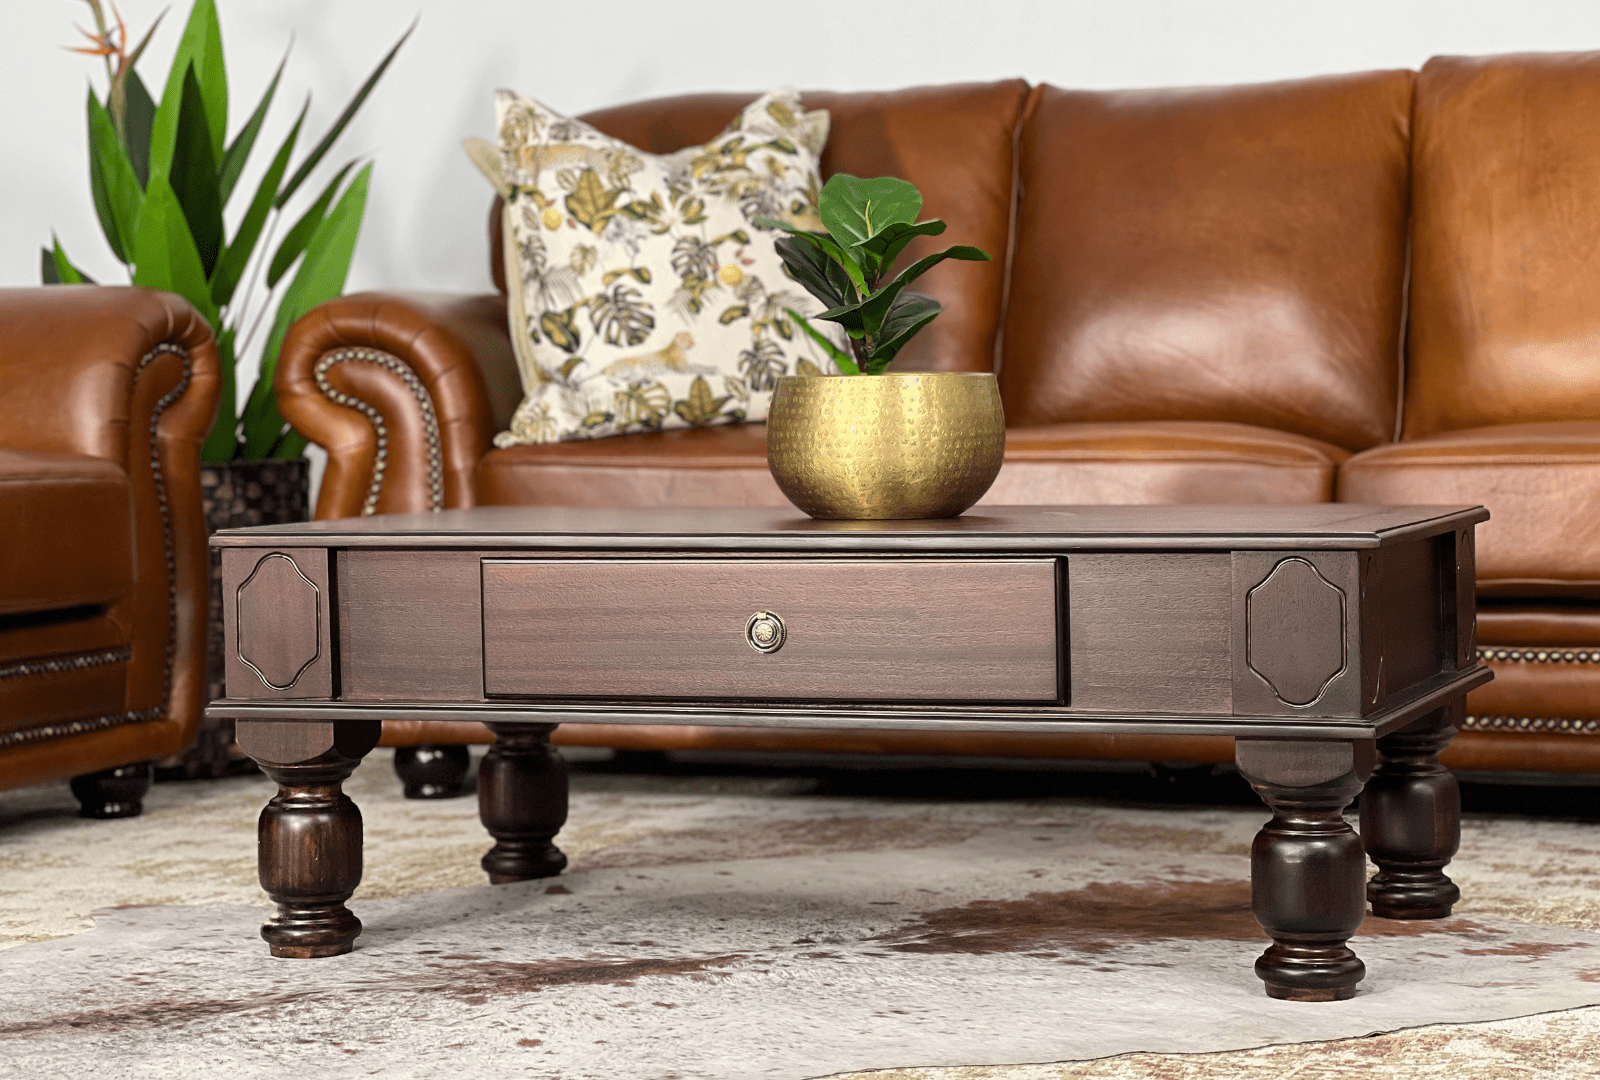 10 Stylish Coffee Tables for Your Living Room - Functional and Affordable Options from Leather Gallery